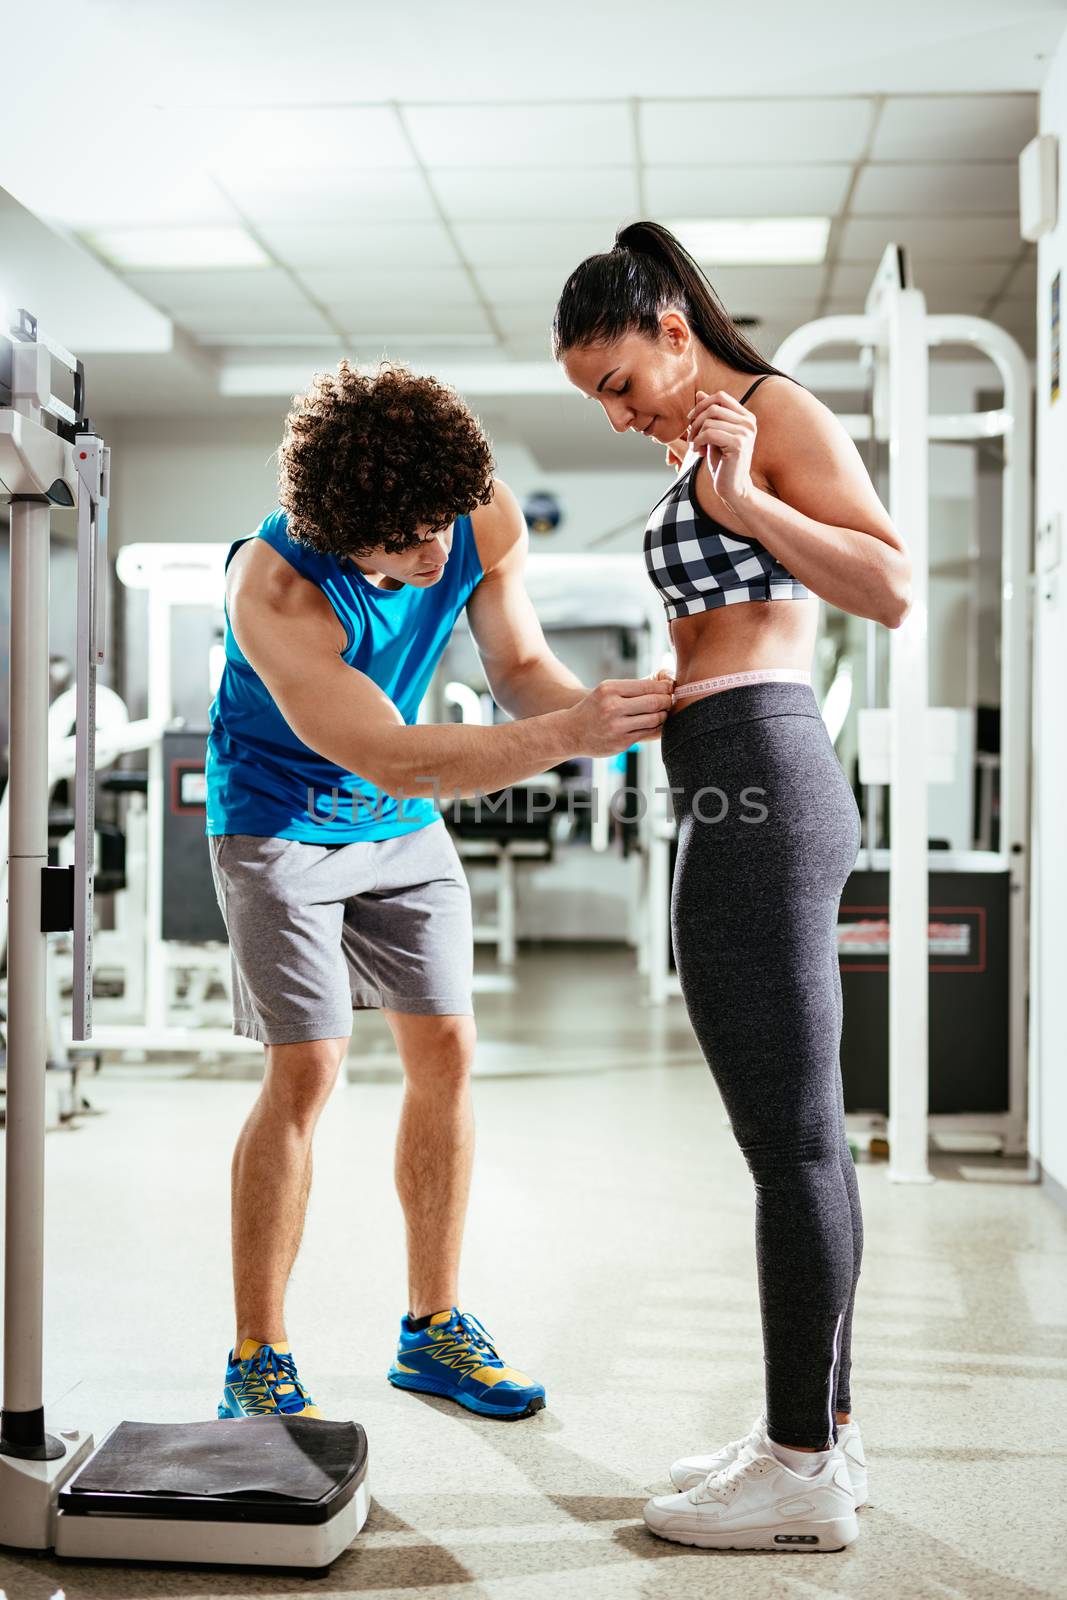 Fitness instructor measuring woman's waist before workout at the gym.